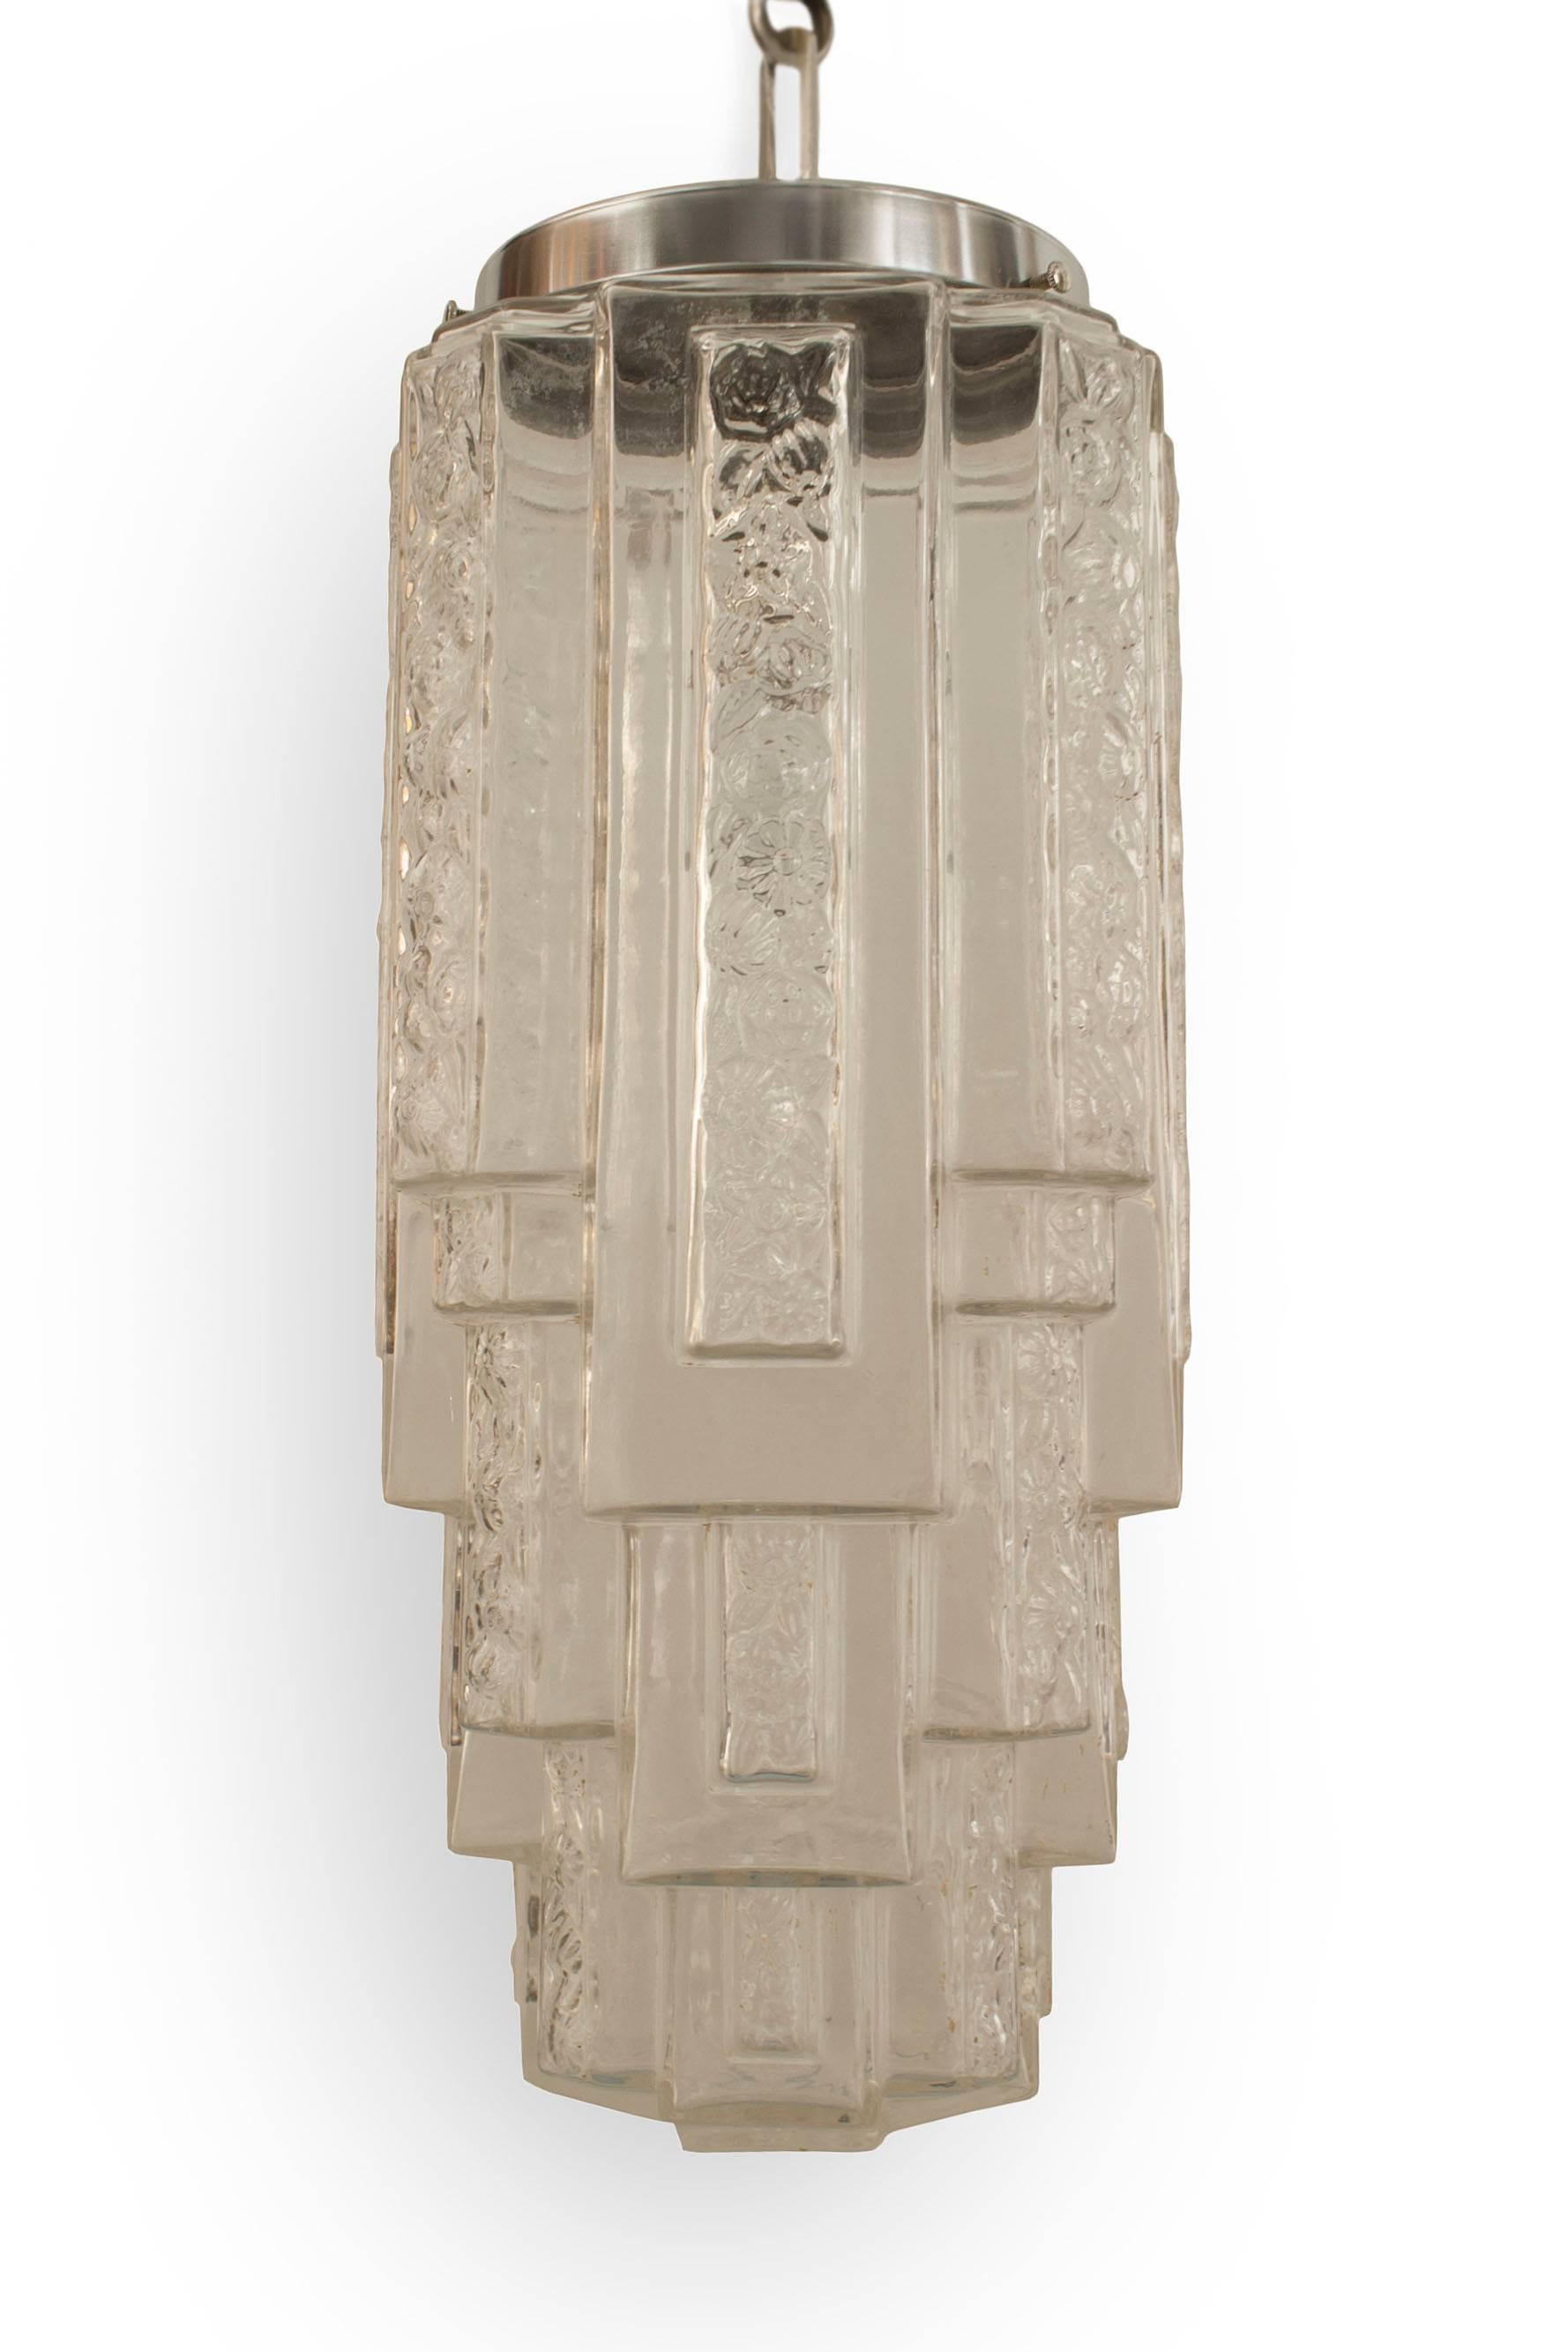 French Art Deco (1930s) clear and molded geometric design glass 3 tiered square shaped lantern.
